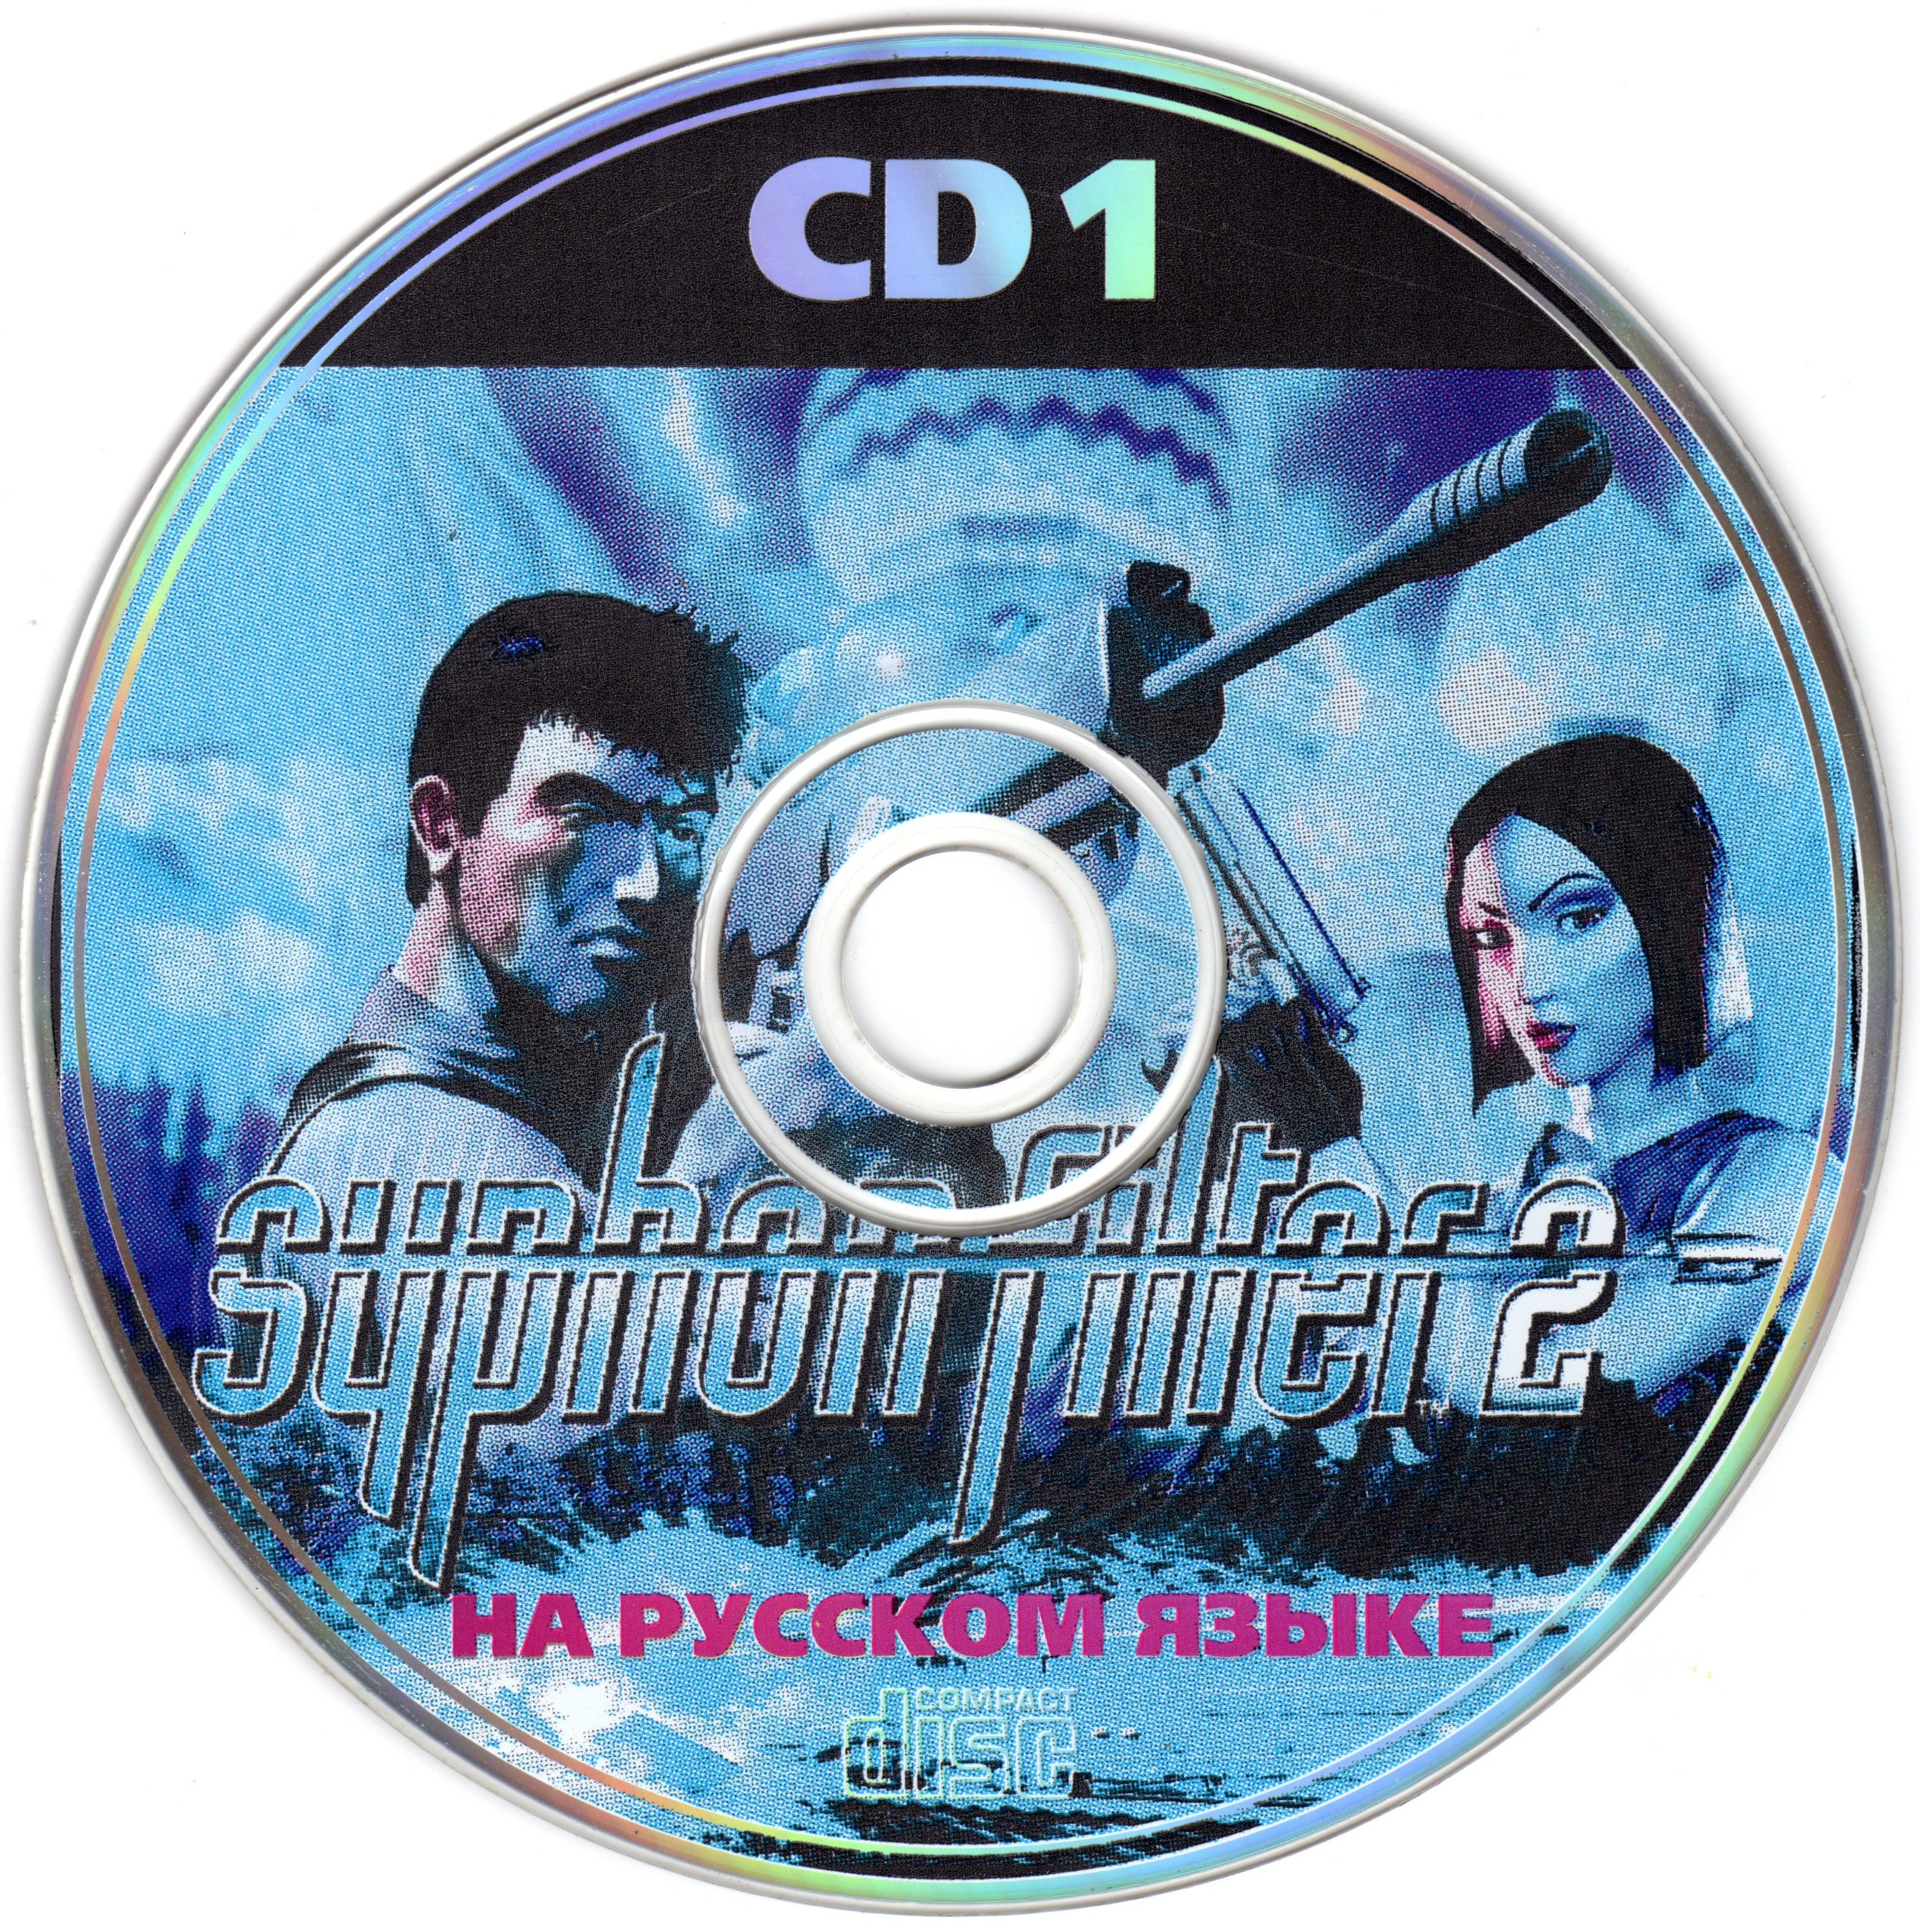 First cd. Syphon Filter 2 ps1 CD Cover. Syphon Filter 2 cd2 ps1. Сифон фильтр 2 диски Paradox. Syphon PS 1 CD.